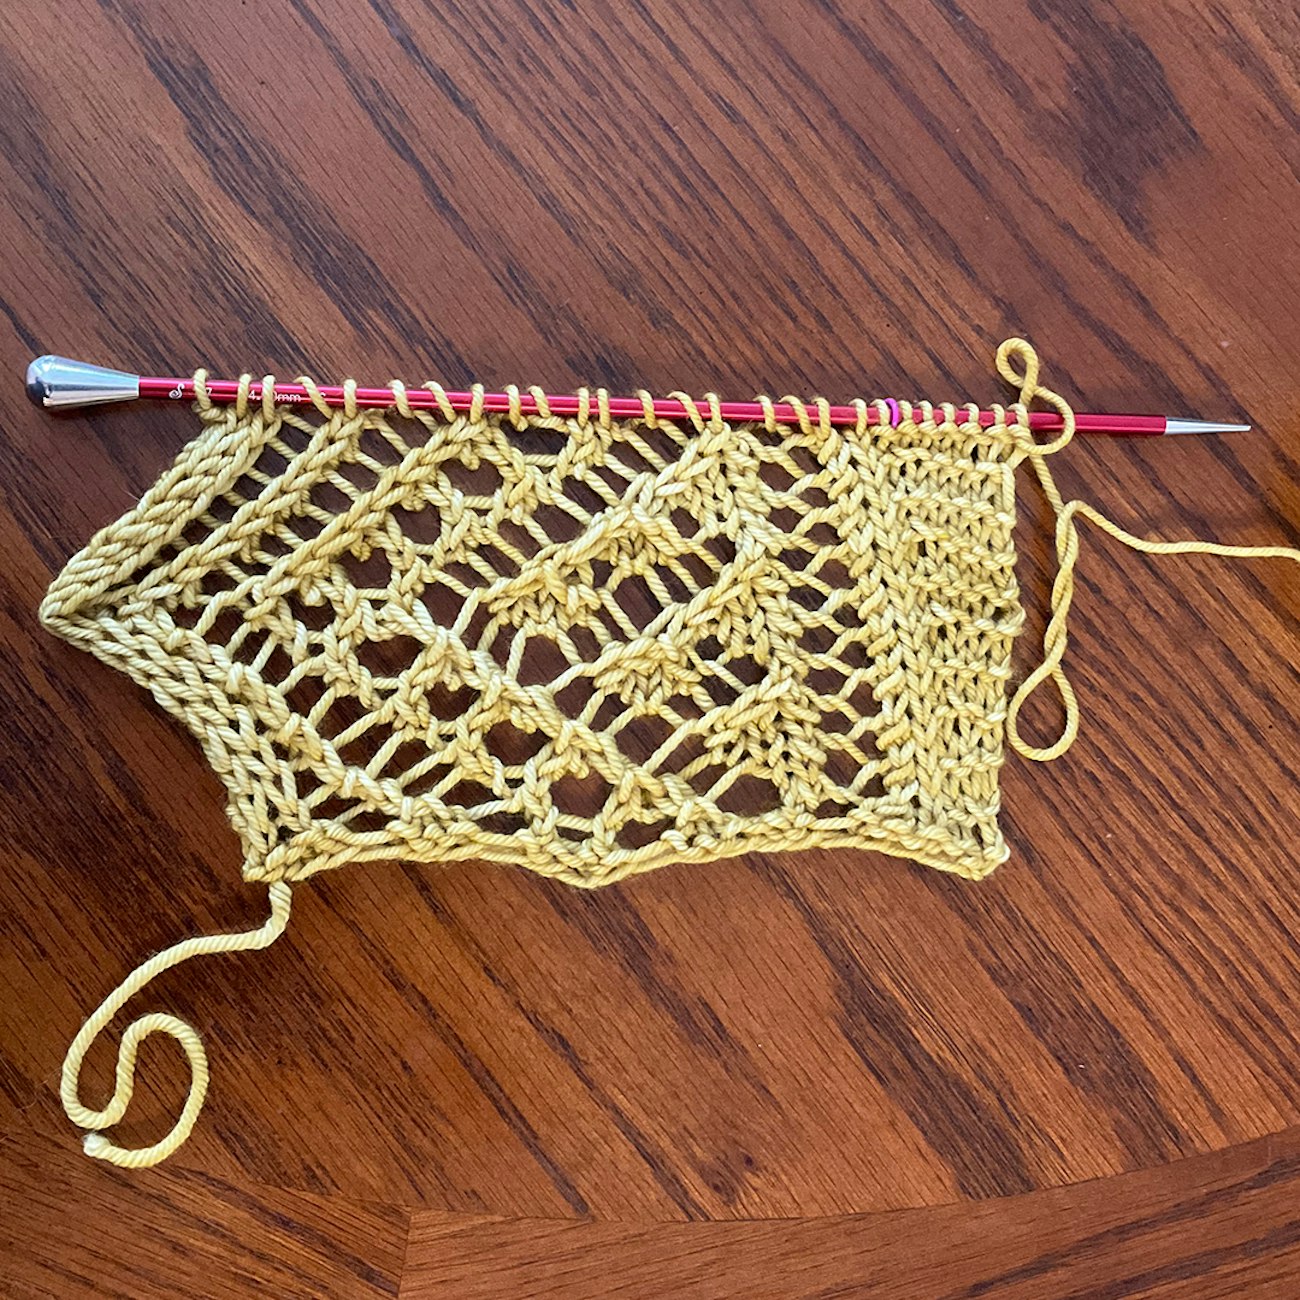 Repeat of lace knitting in gold yarn on red needle